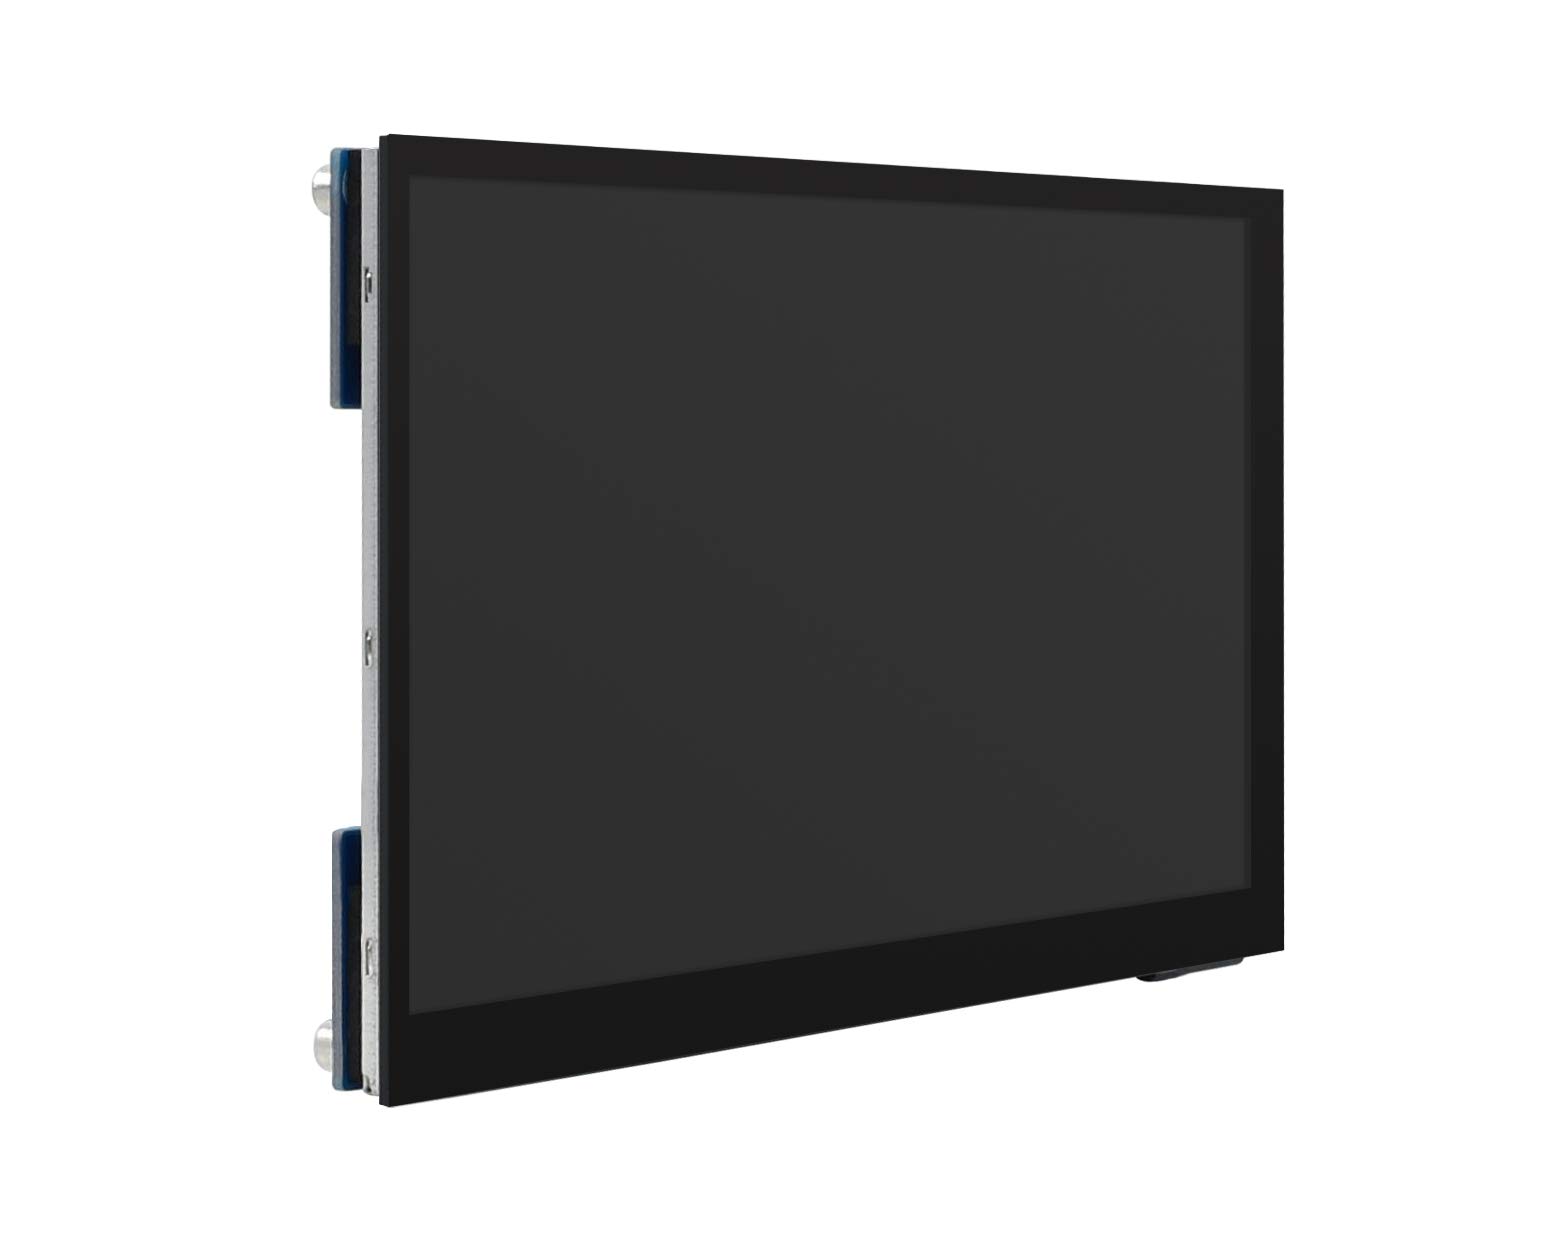 Ingcool 7 inch HDMI LCD 1024x600 Resolution Capacitive Touch Screen IPS Display Module Compatible with Raspberry Pi 4 3 2 1 B B+ A+, PC, Supports Windows 10/8.1/8 / 7